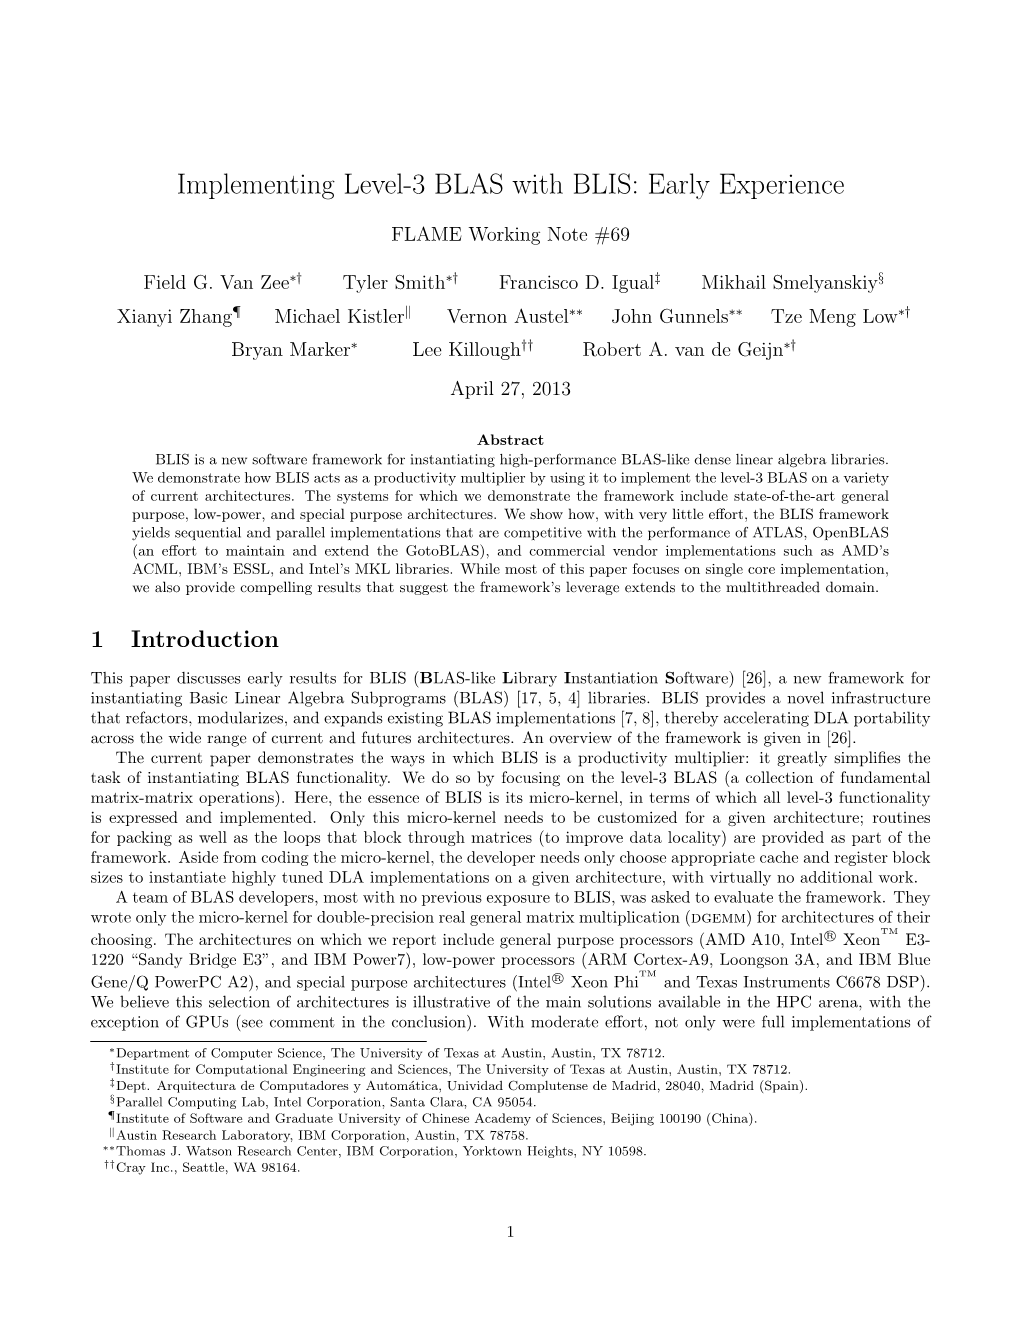 Implementing Level-3 BLAS with BLIS: Early Experience